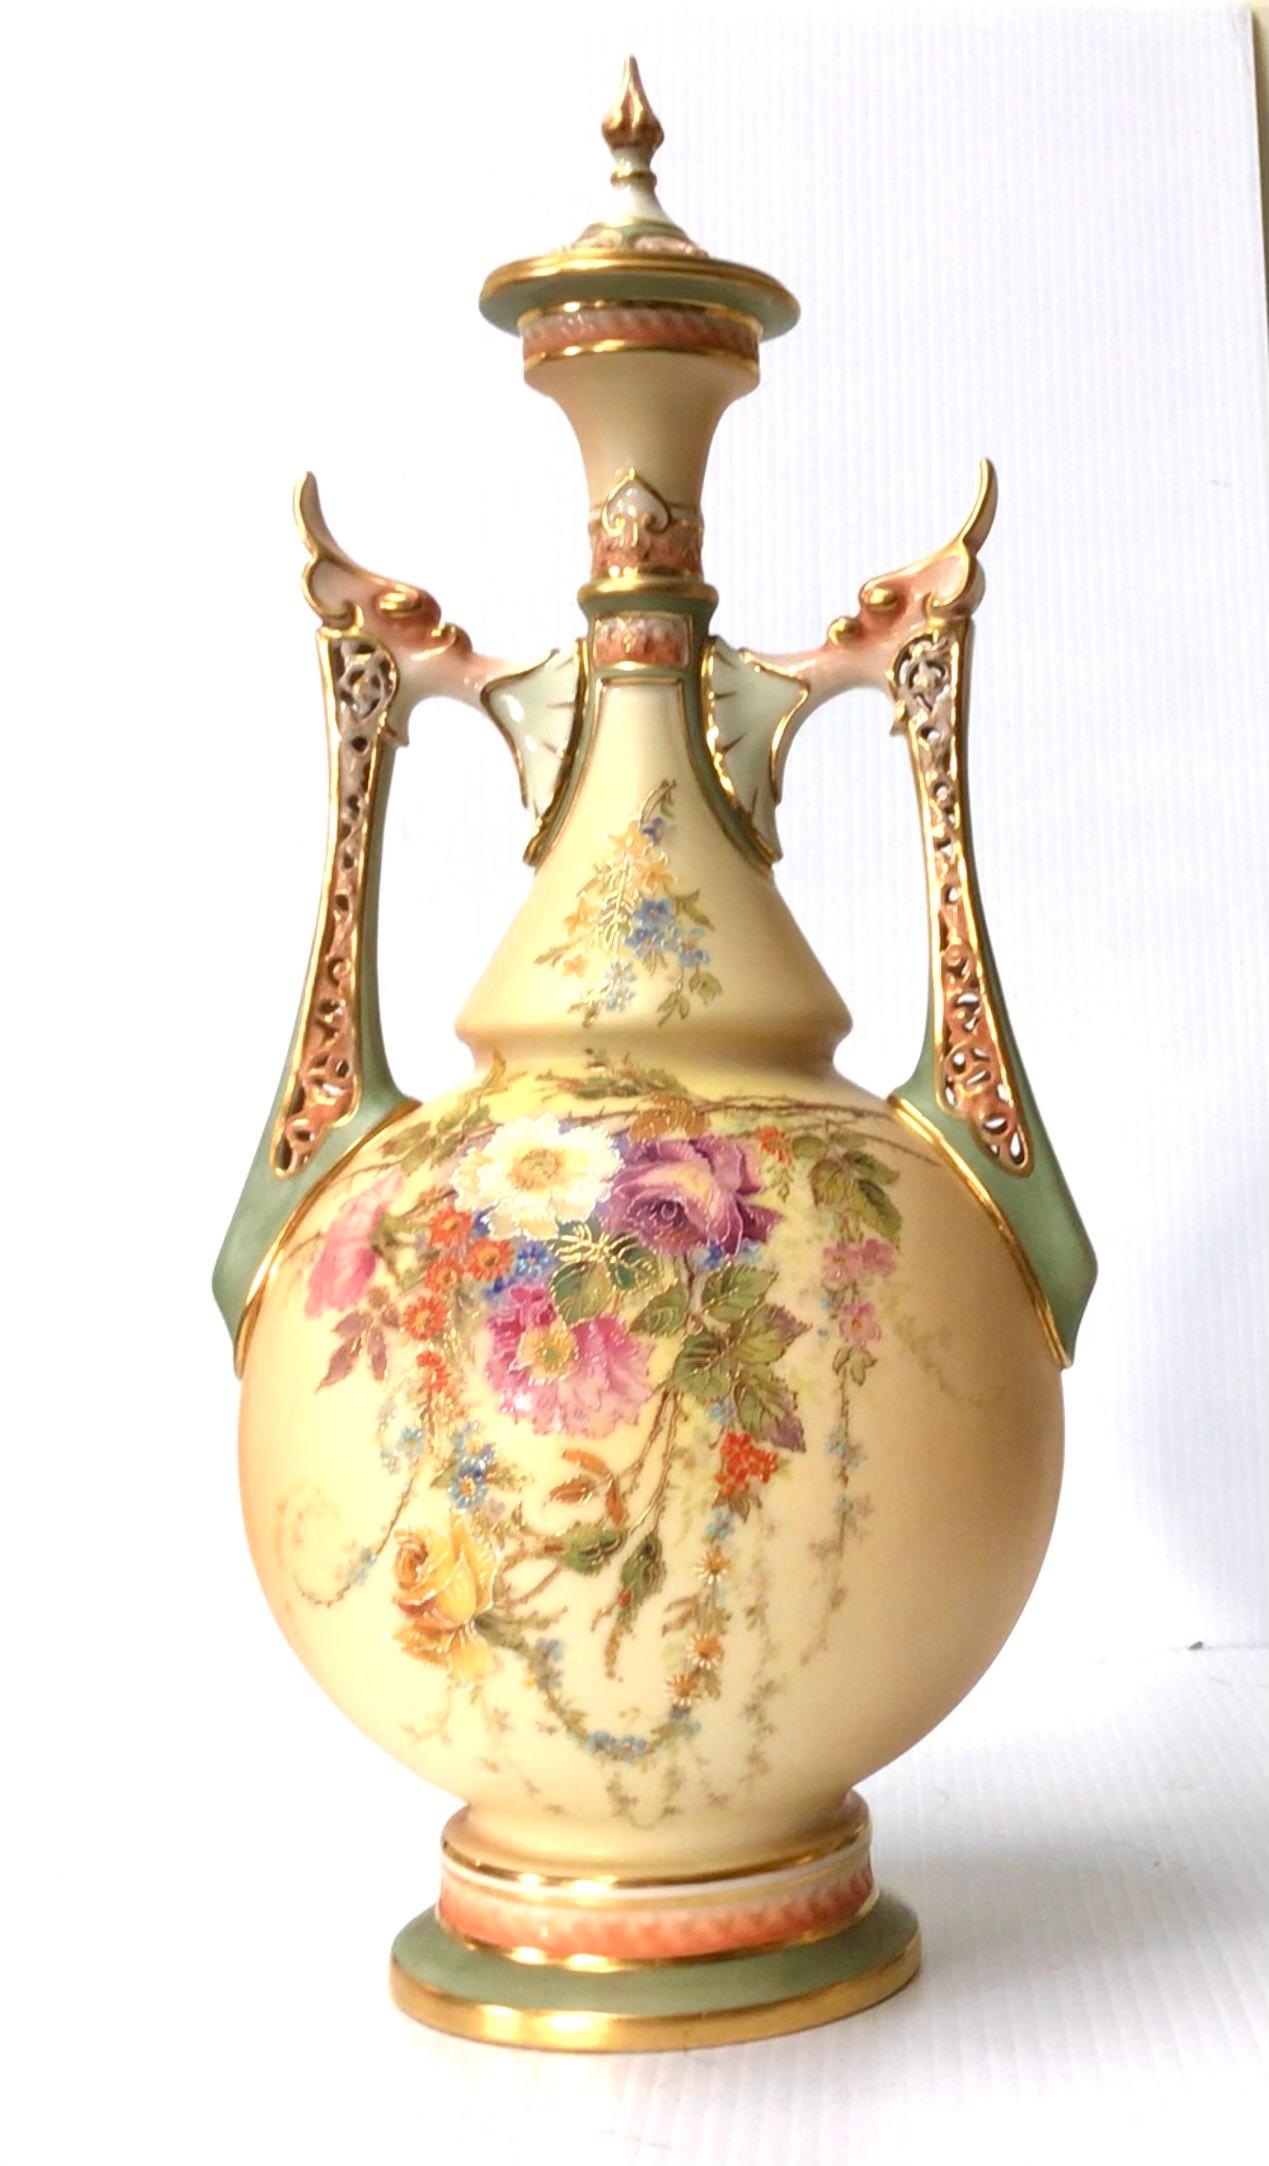 Fabulous large antique Royal Worcester blush ivory vase with cover hand painted with flowers and foliage. (Persian shape Influence)
Dated puce mark 1905
16ins x 7ins x 6ins deep.